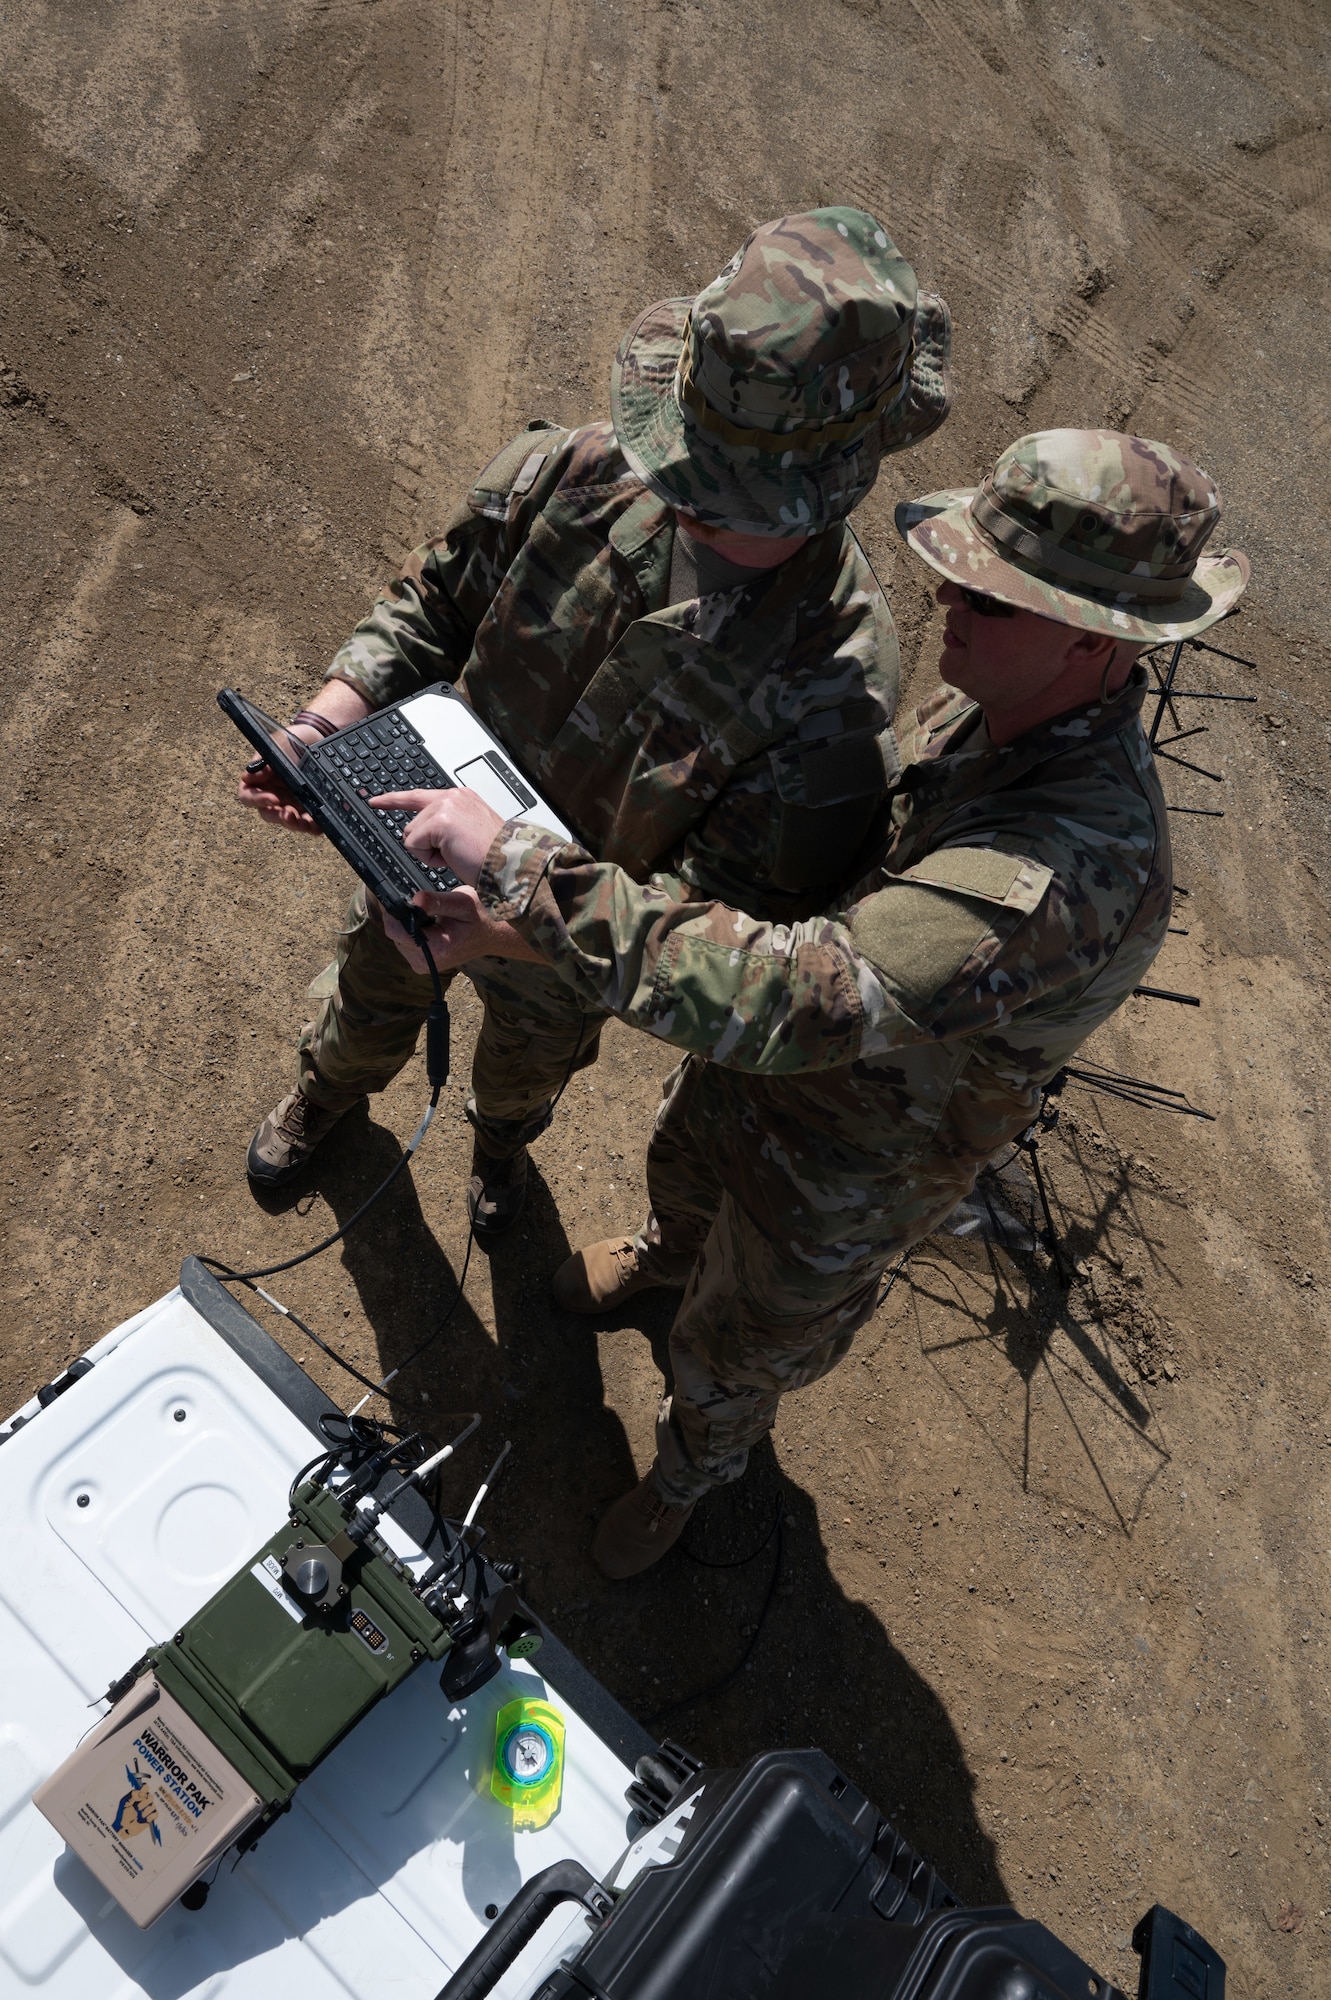 U.S. Air Force Tech Sgt. Laramie Grisba (left) and Tech Sgt. Collin Lopes (right) radio frequency transmission systems specialists from the 55th and 35th Combat Communications Squadrons, Tinker Air Force Base, Oklahoma set up a high frequency radio communication device in Coldfoot, Alaska as part of Phase 2 of AGILE BLIZZARD-UNIFIED VISION June 11, 2023. The equipment checks were successful at each location on the way to and further north of Coldfoot, Alaska. (U.S. Air Force photo by Staff Sgt. Dana Tourtellotte)